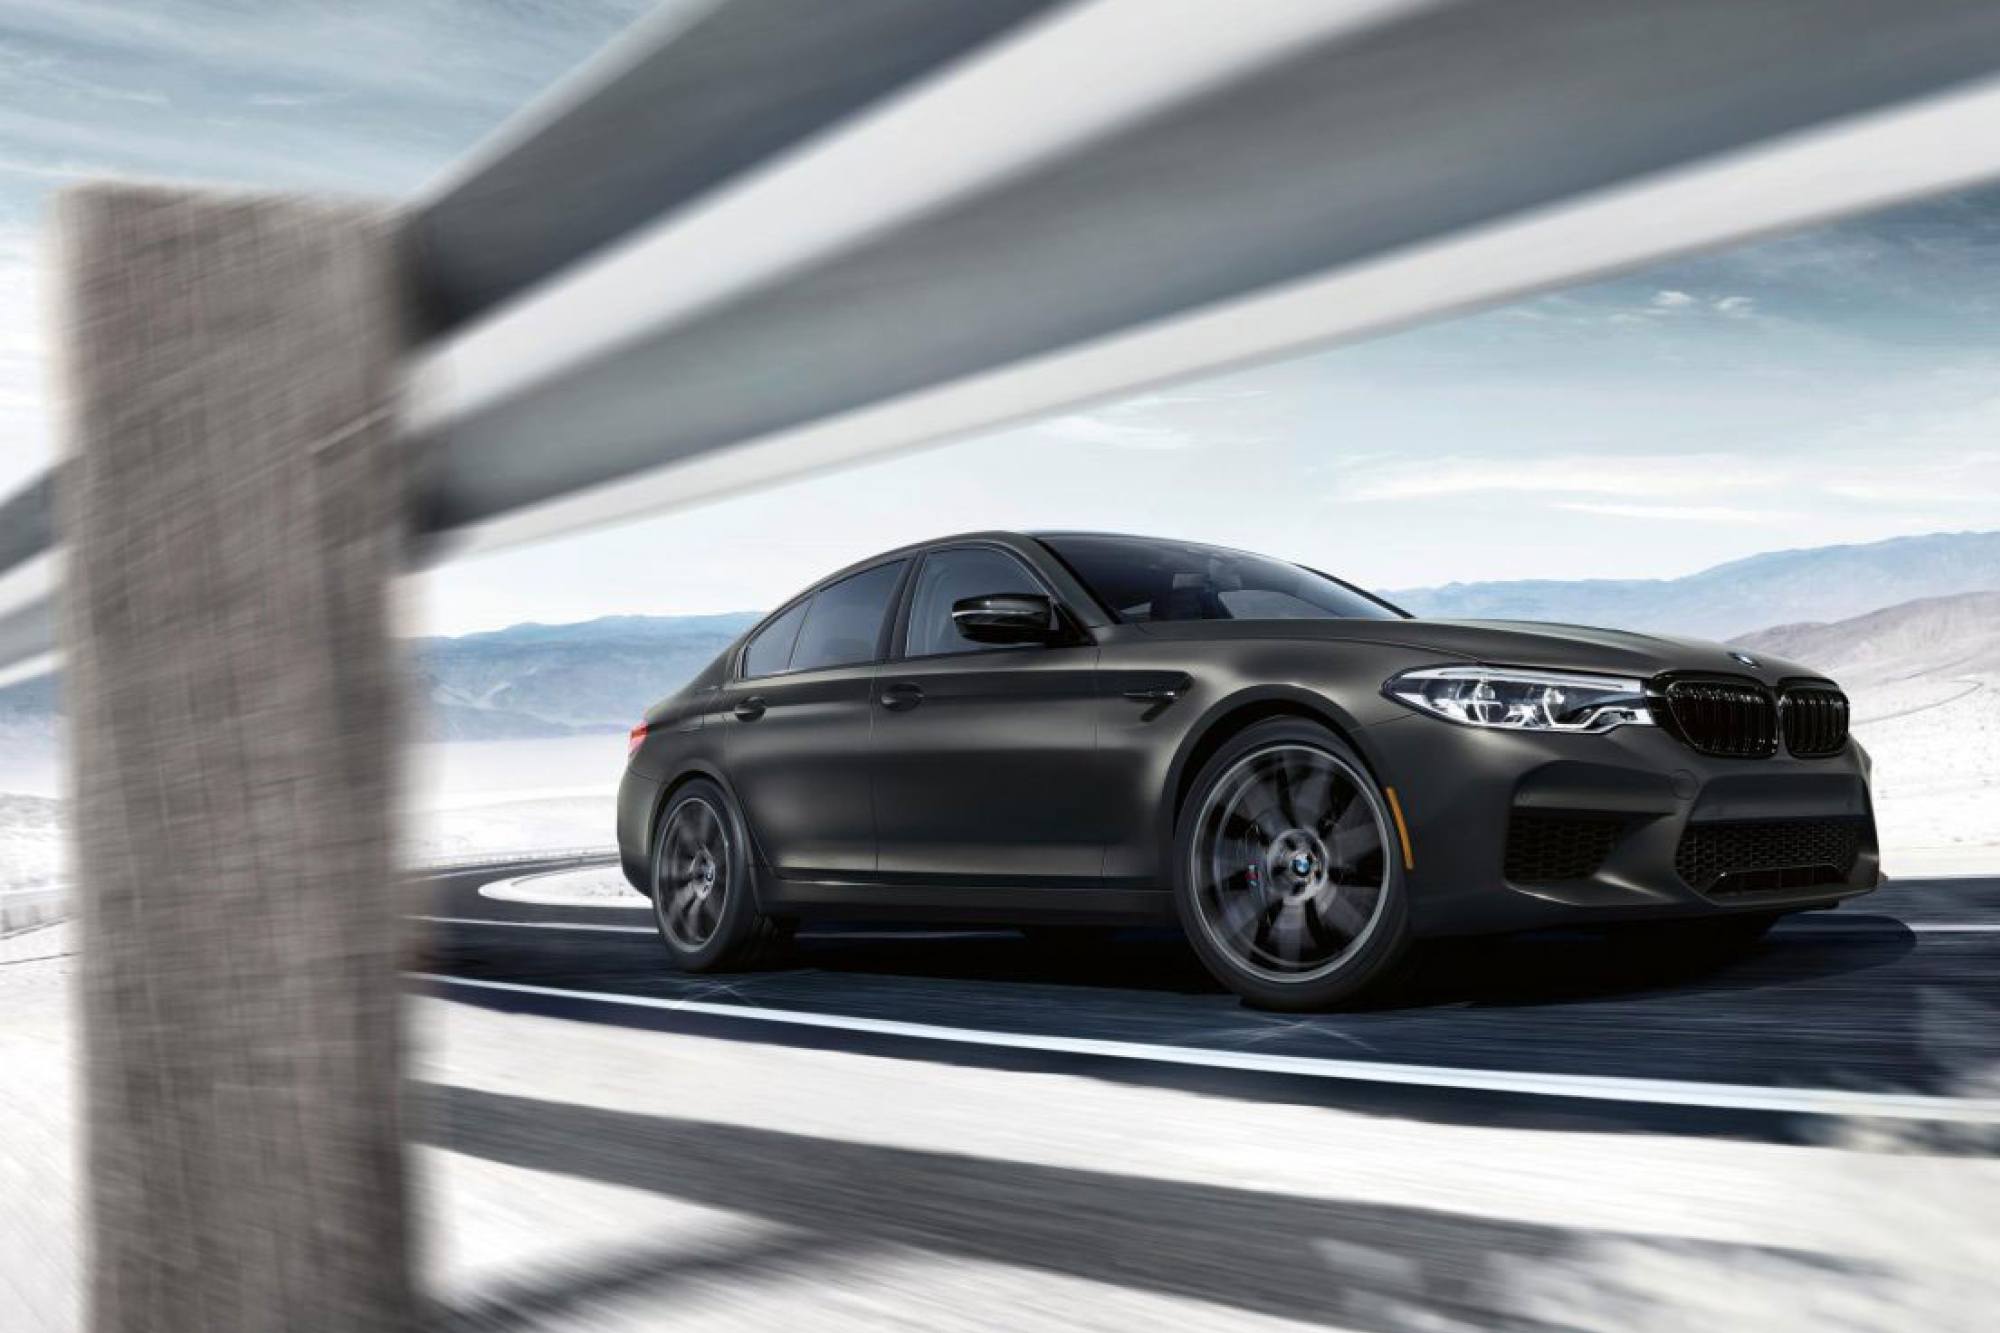 The 2020 BMW M5 Edition 35 Years